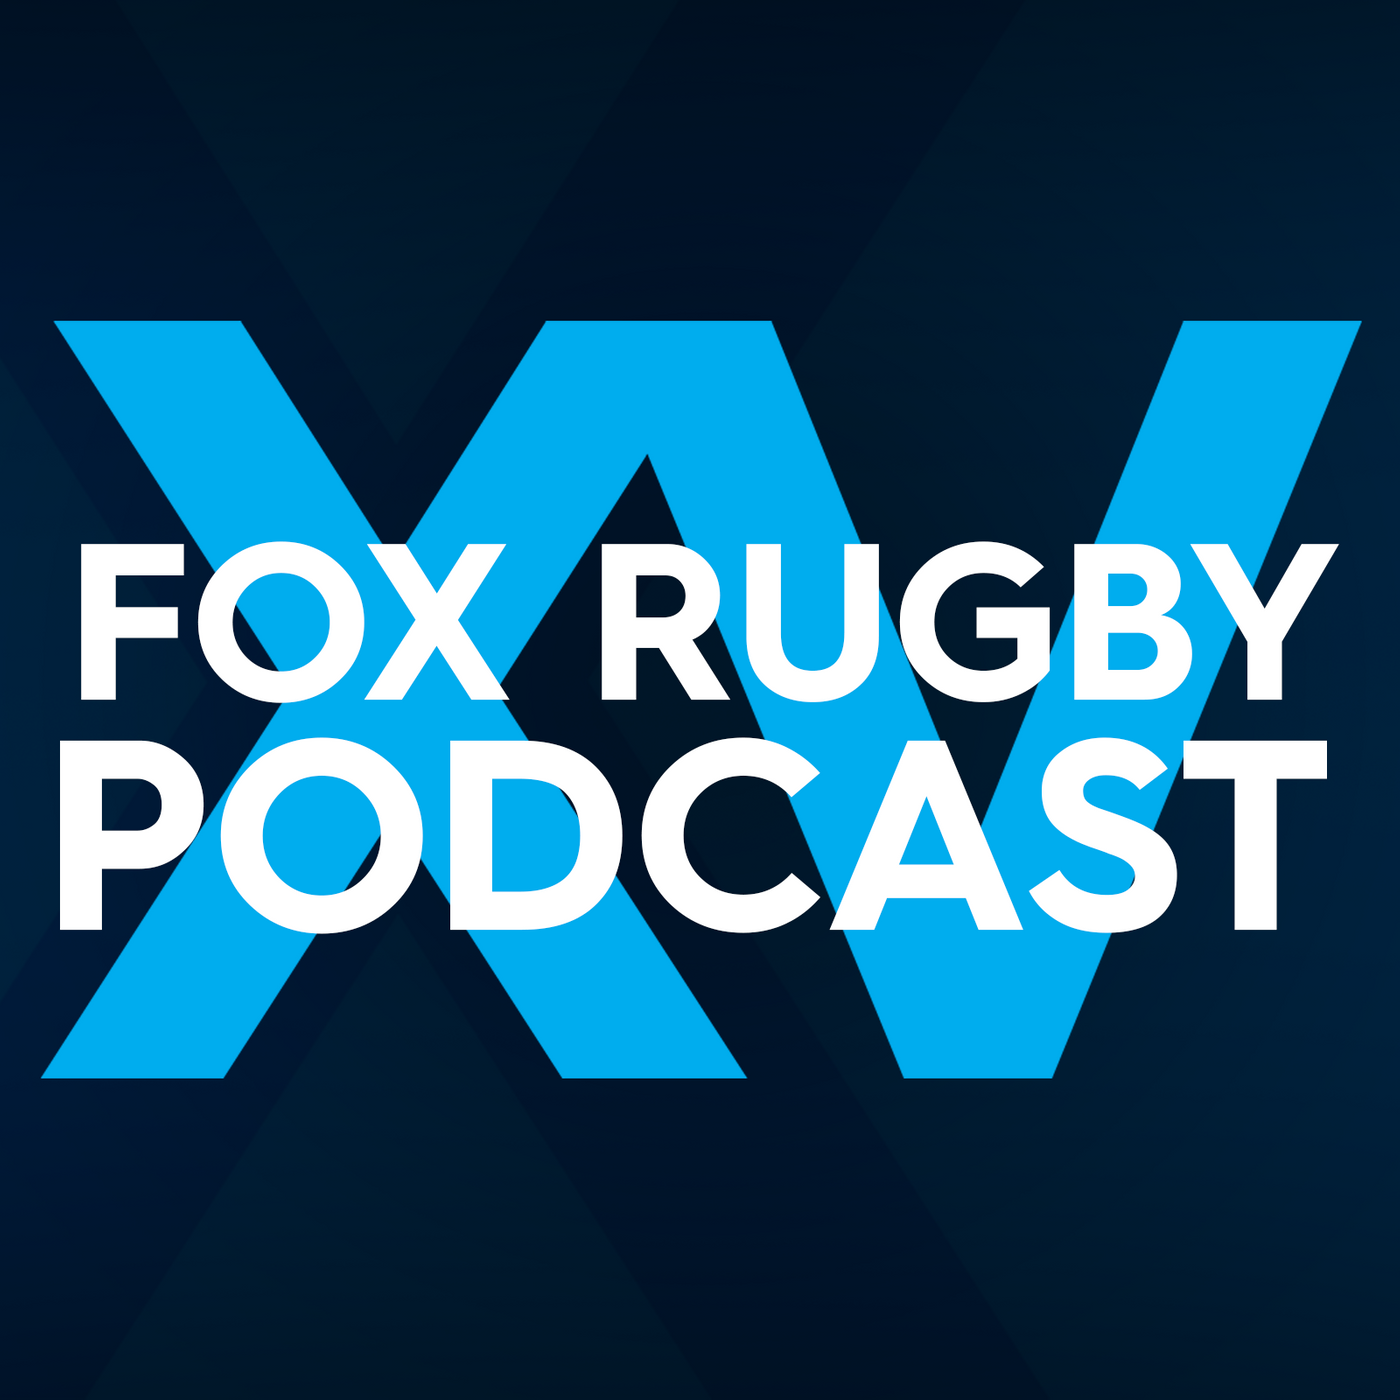 Nick Phipps talks Wallabies Camp | Schalk Brits is playing Royal Melbourne | George Gregan tells George Smith stories